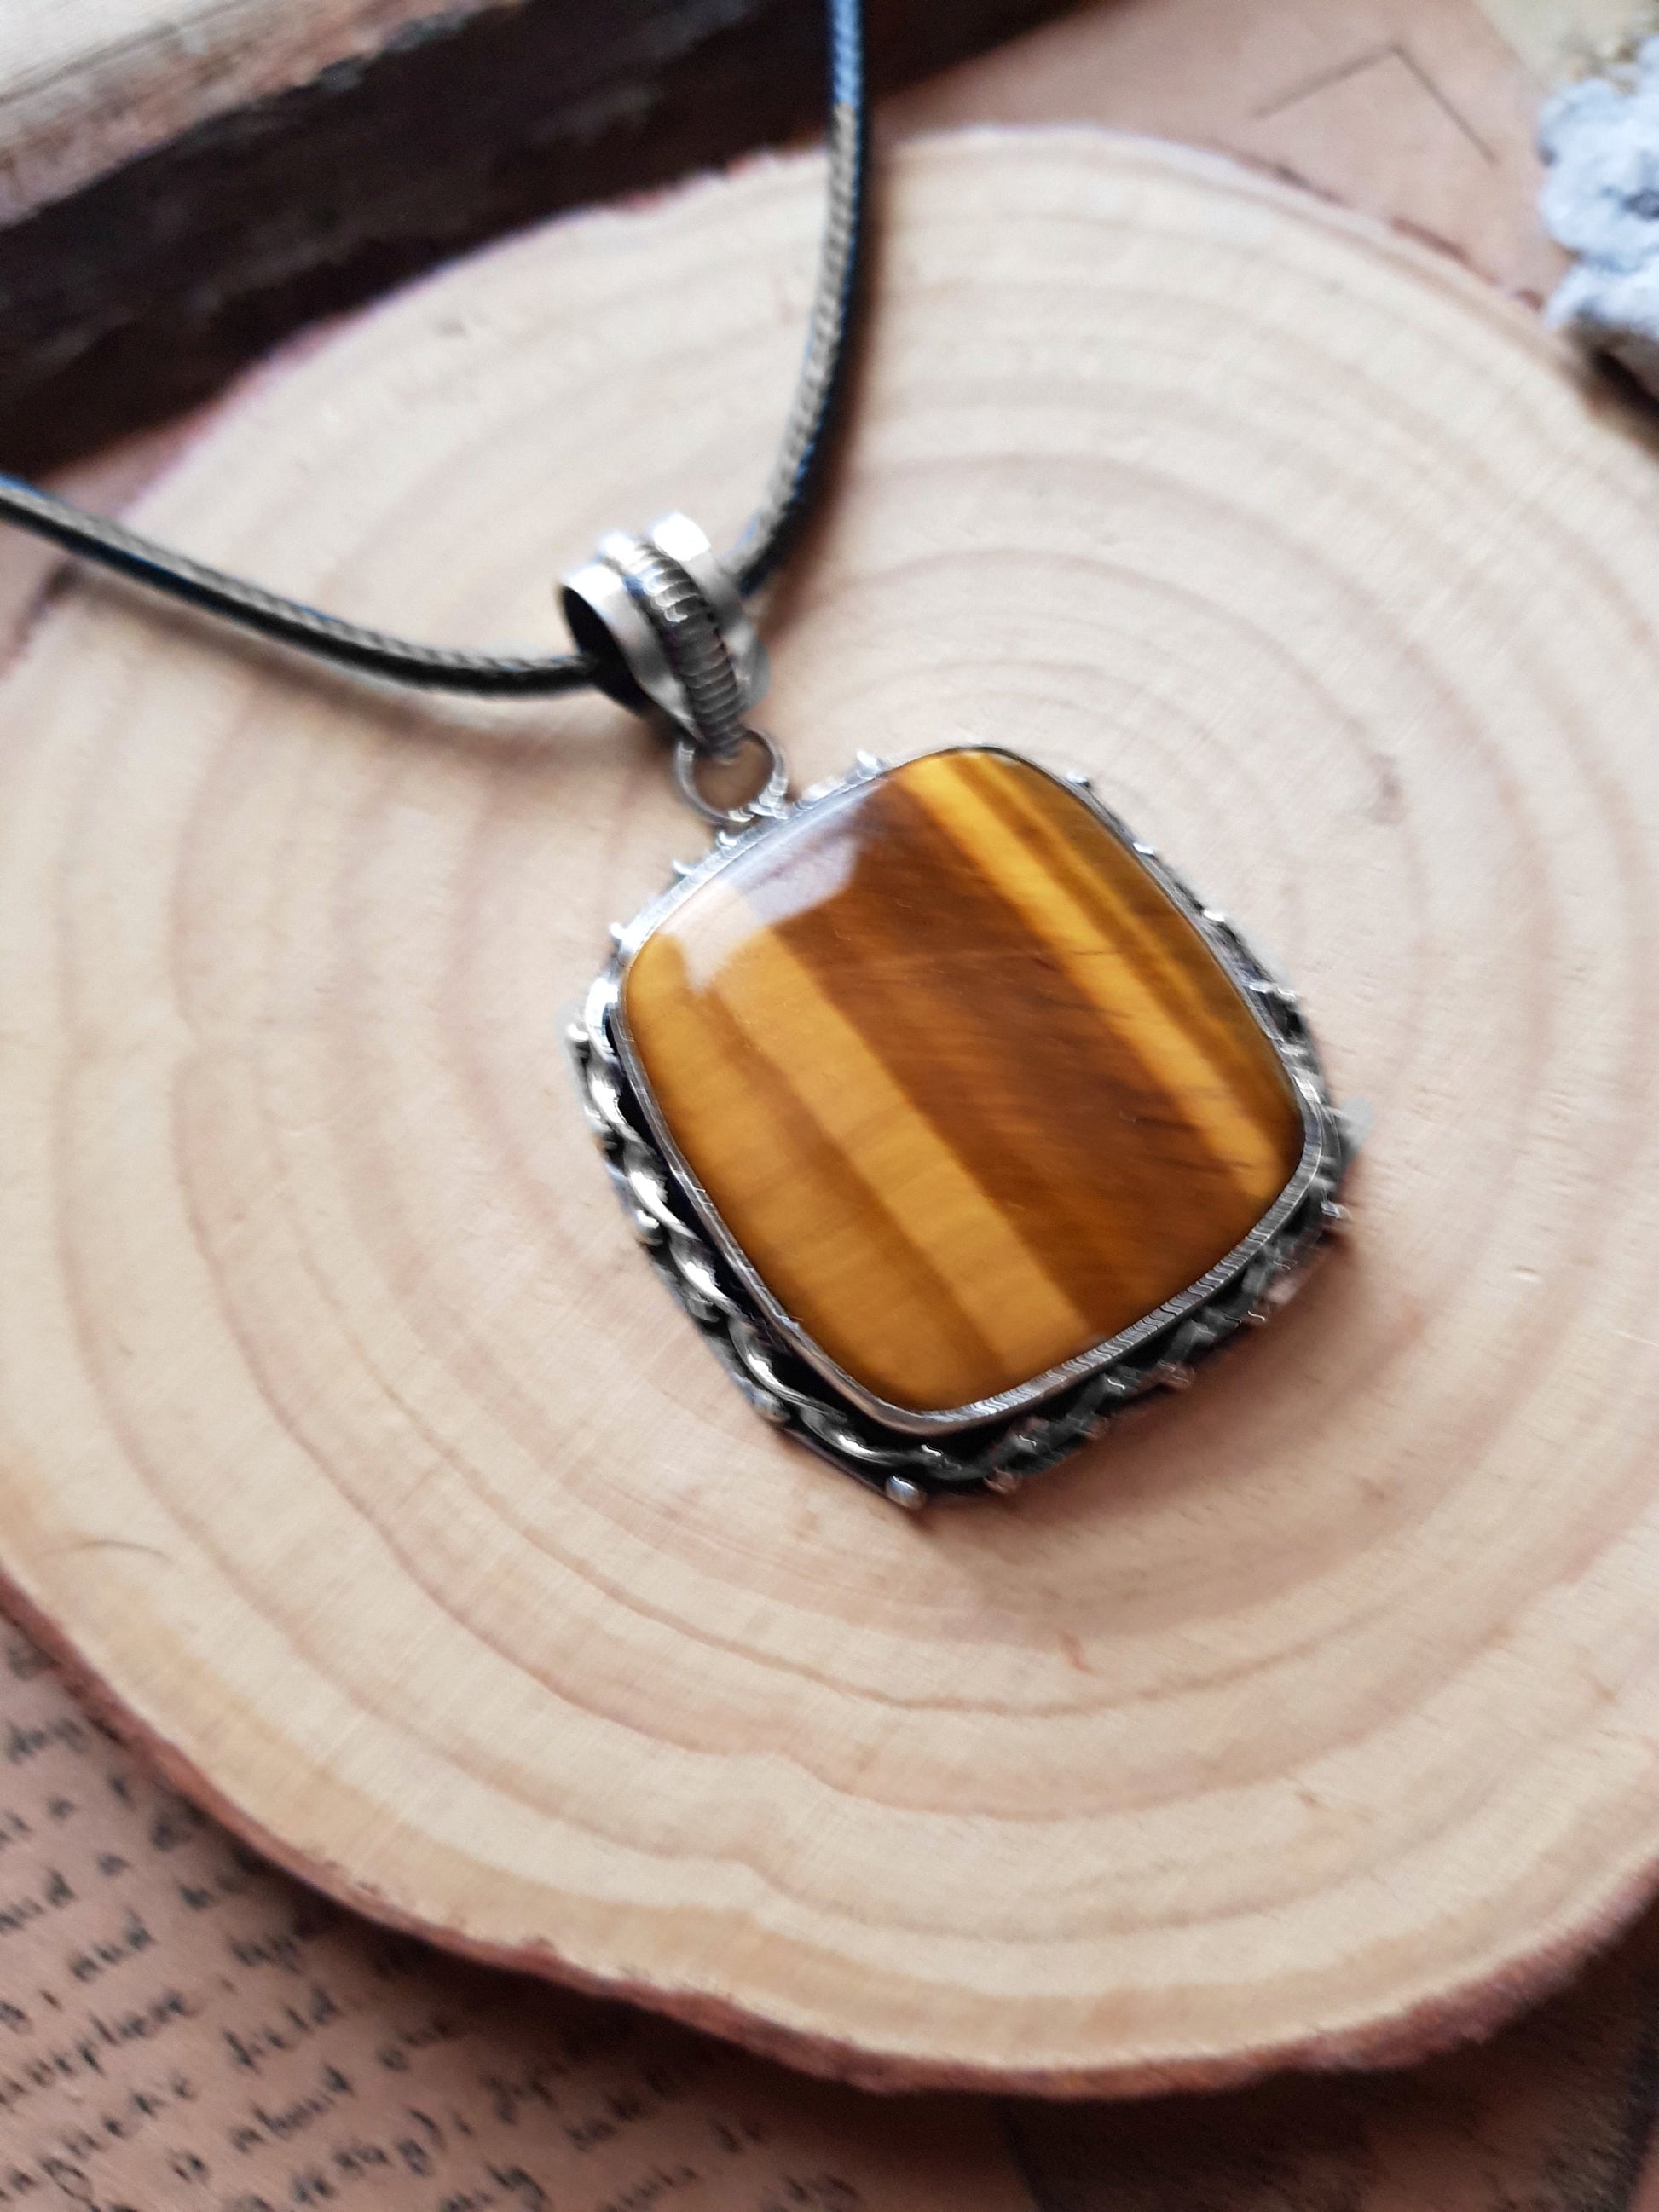 Tiger's Eye Pendant Sterling Silver Statement Necklace Boho Gemstone Pendant Unique Gift For Her